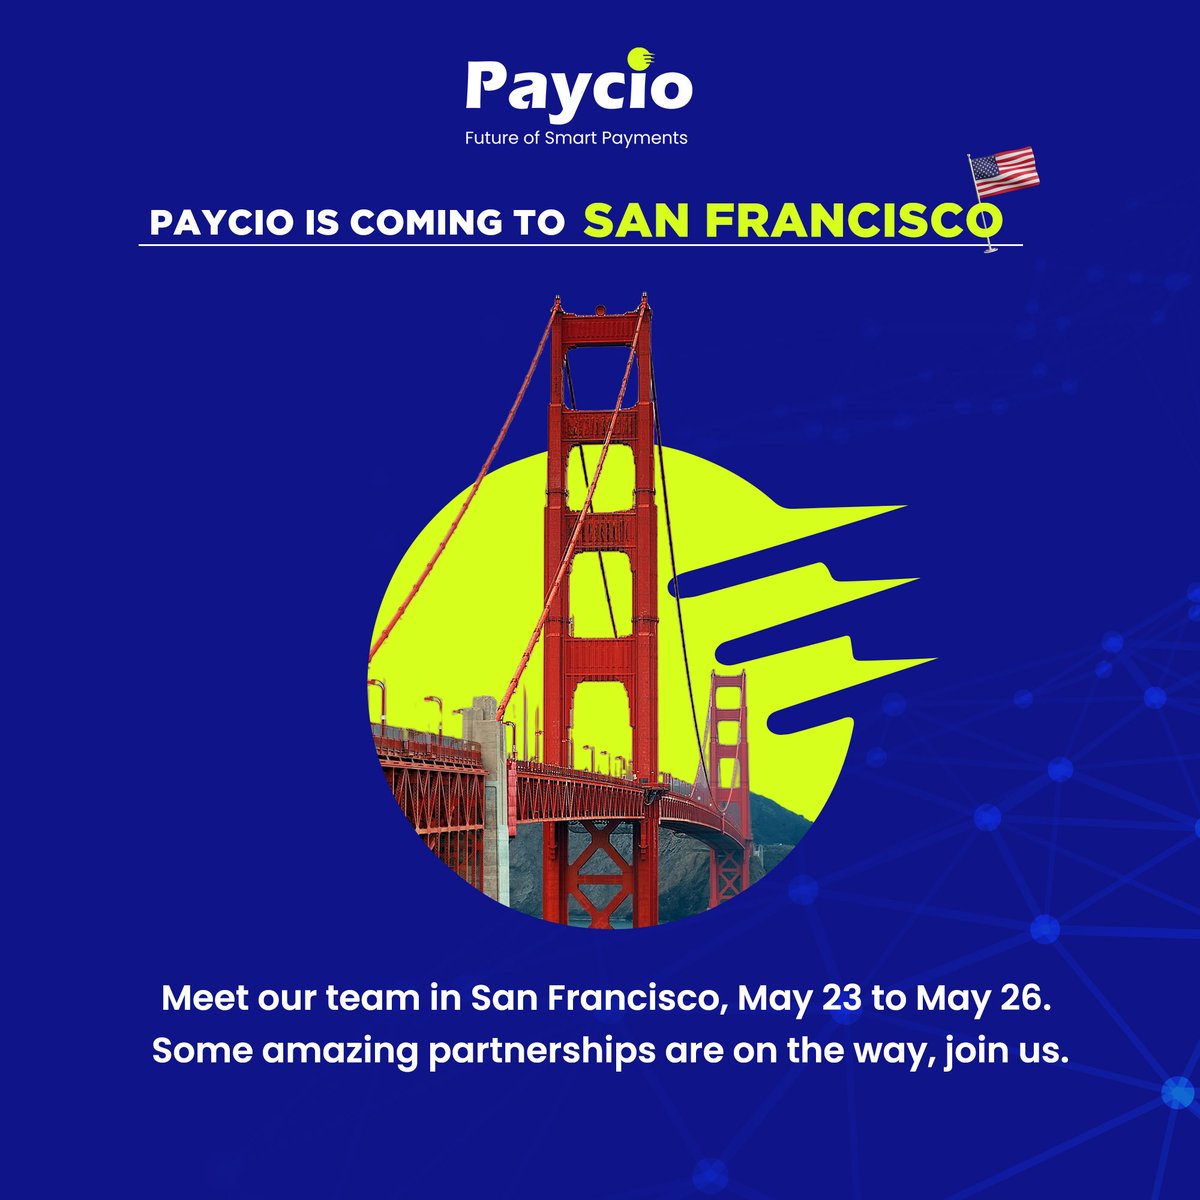 Our Paycio team is taking off to San Francisco, and we can't wait to connect with you! If you're in the area, let's meet and discuss the amazing opportunities for collaboration. Let's turn our innovative ideas into reality together. See you soon! #PaycioInSF #Collaboration